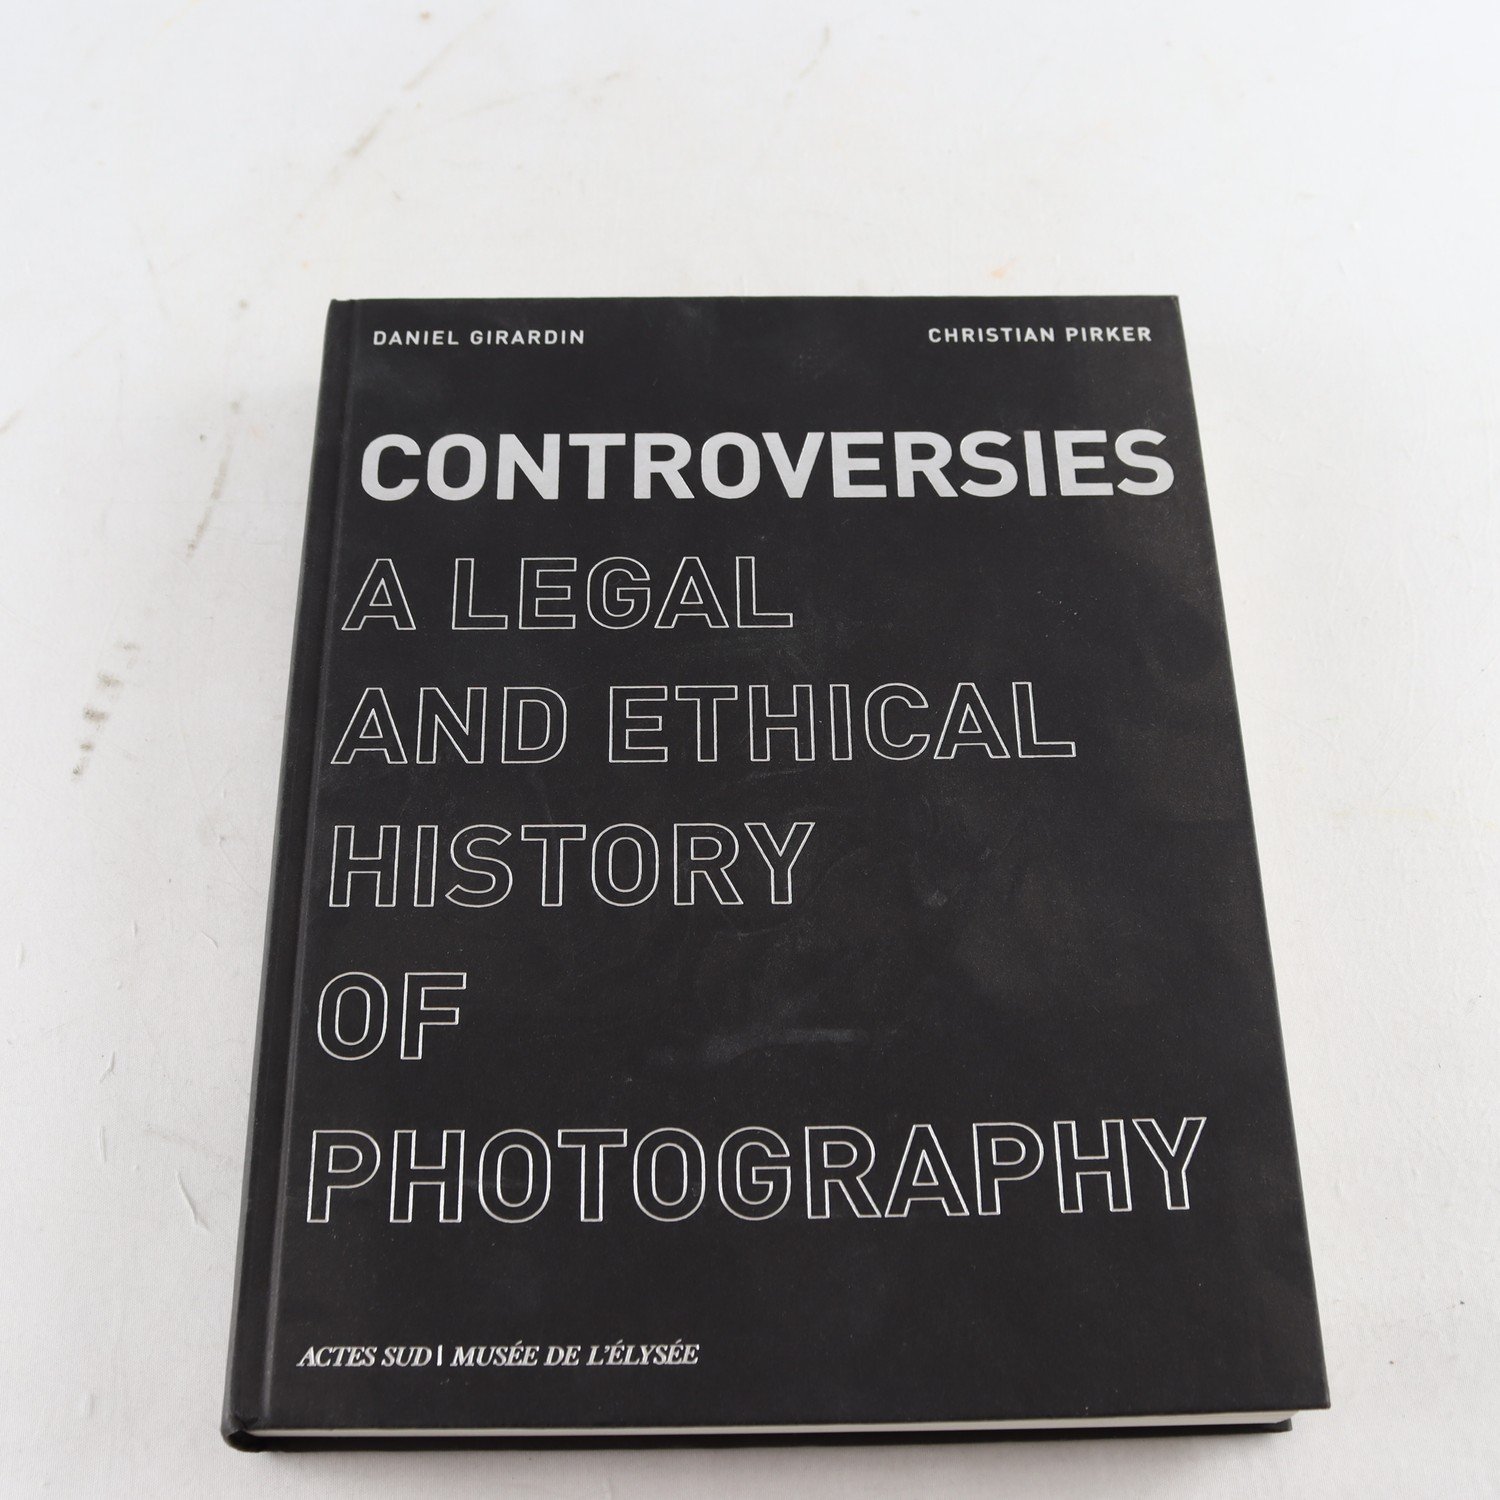 Controversies: A Legal and Ethical History of Photography